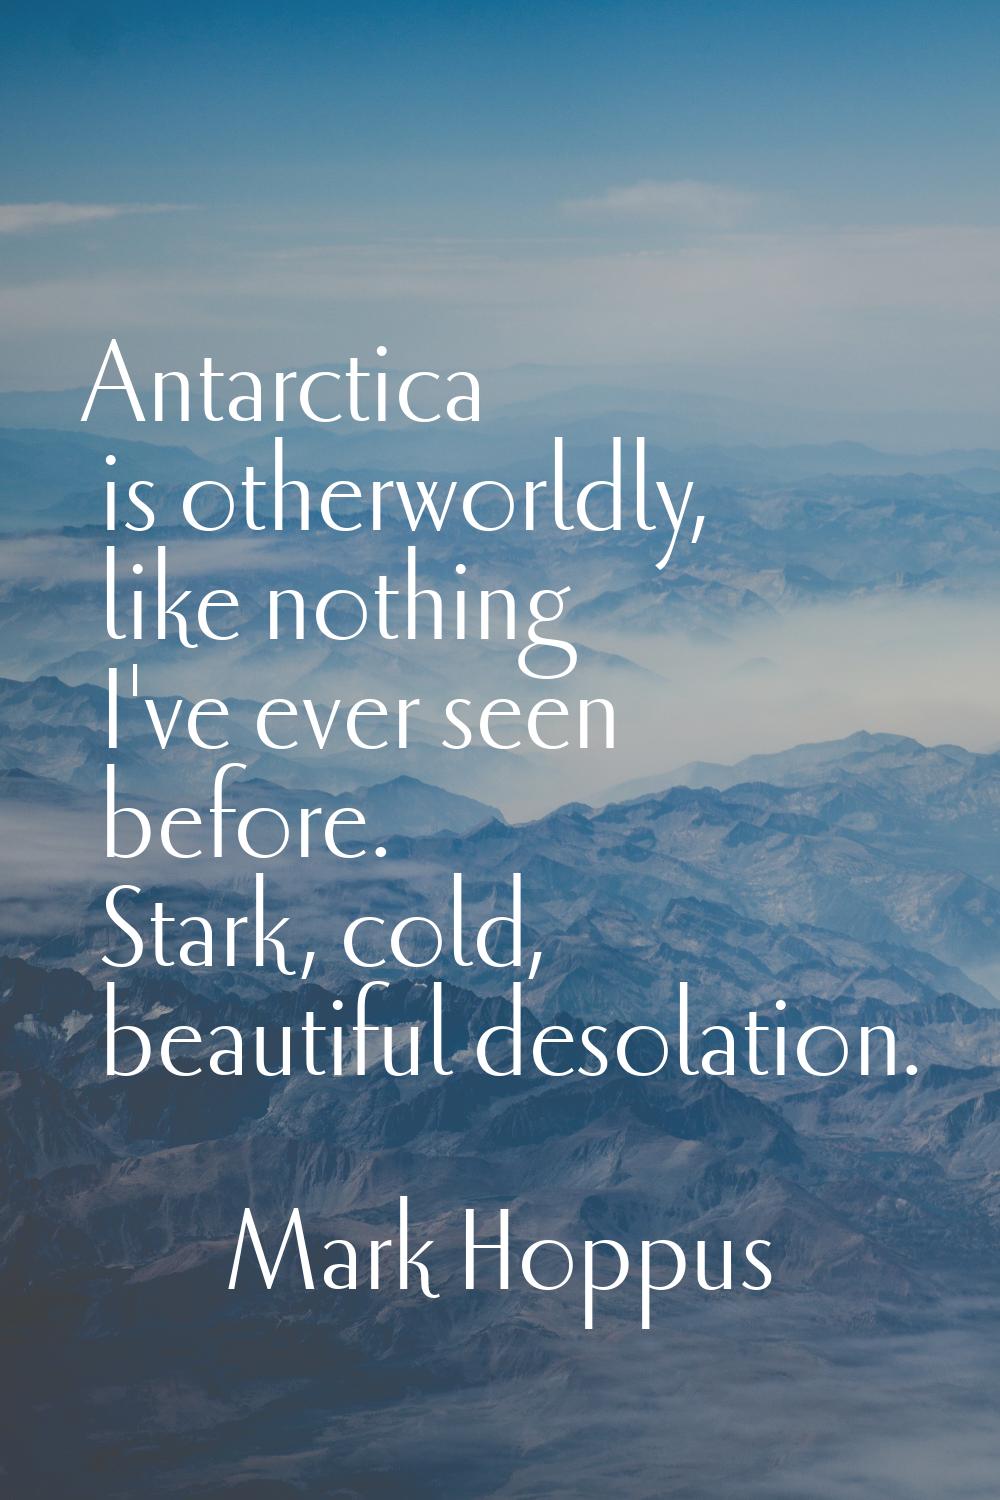 Antarctica is otherworldly, like nothing I've ever seen before. Stark, cold, beautiful desolation.